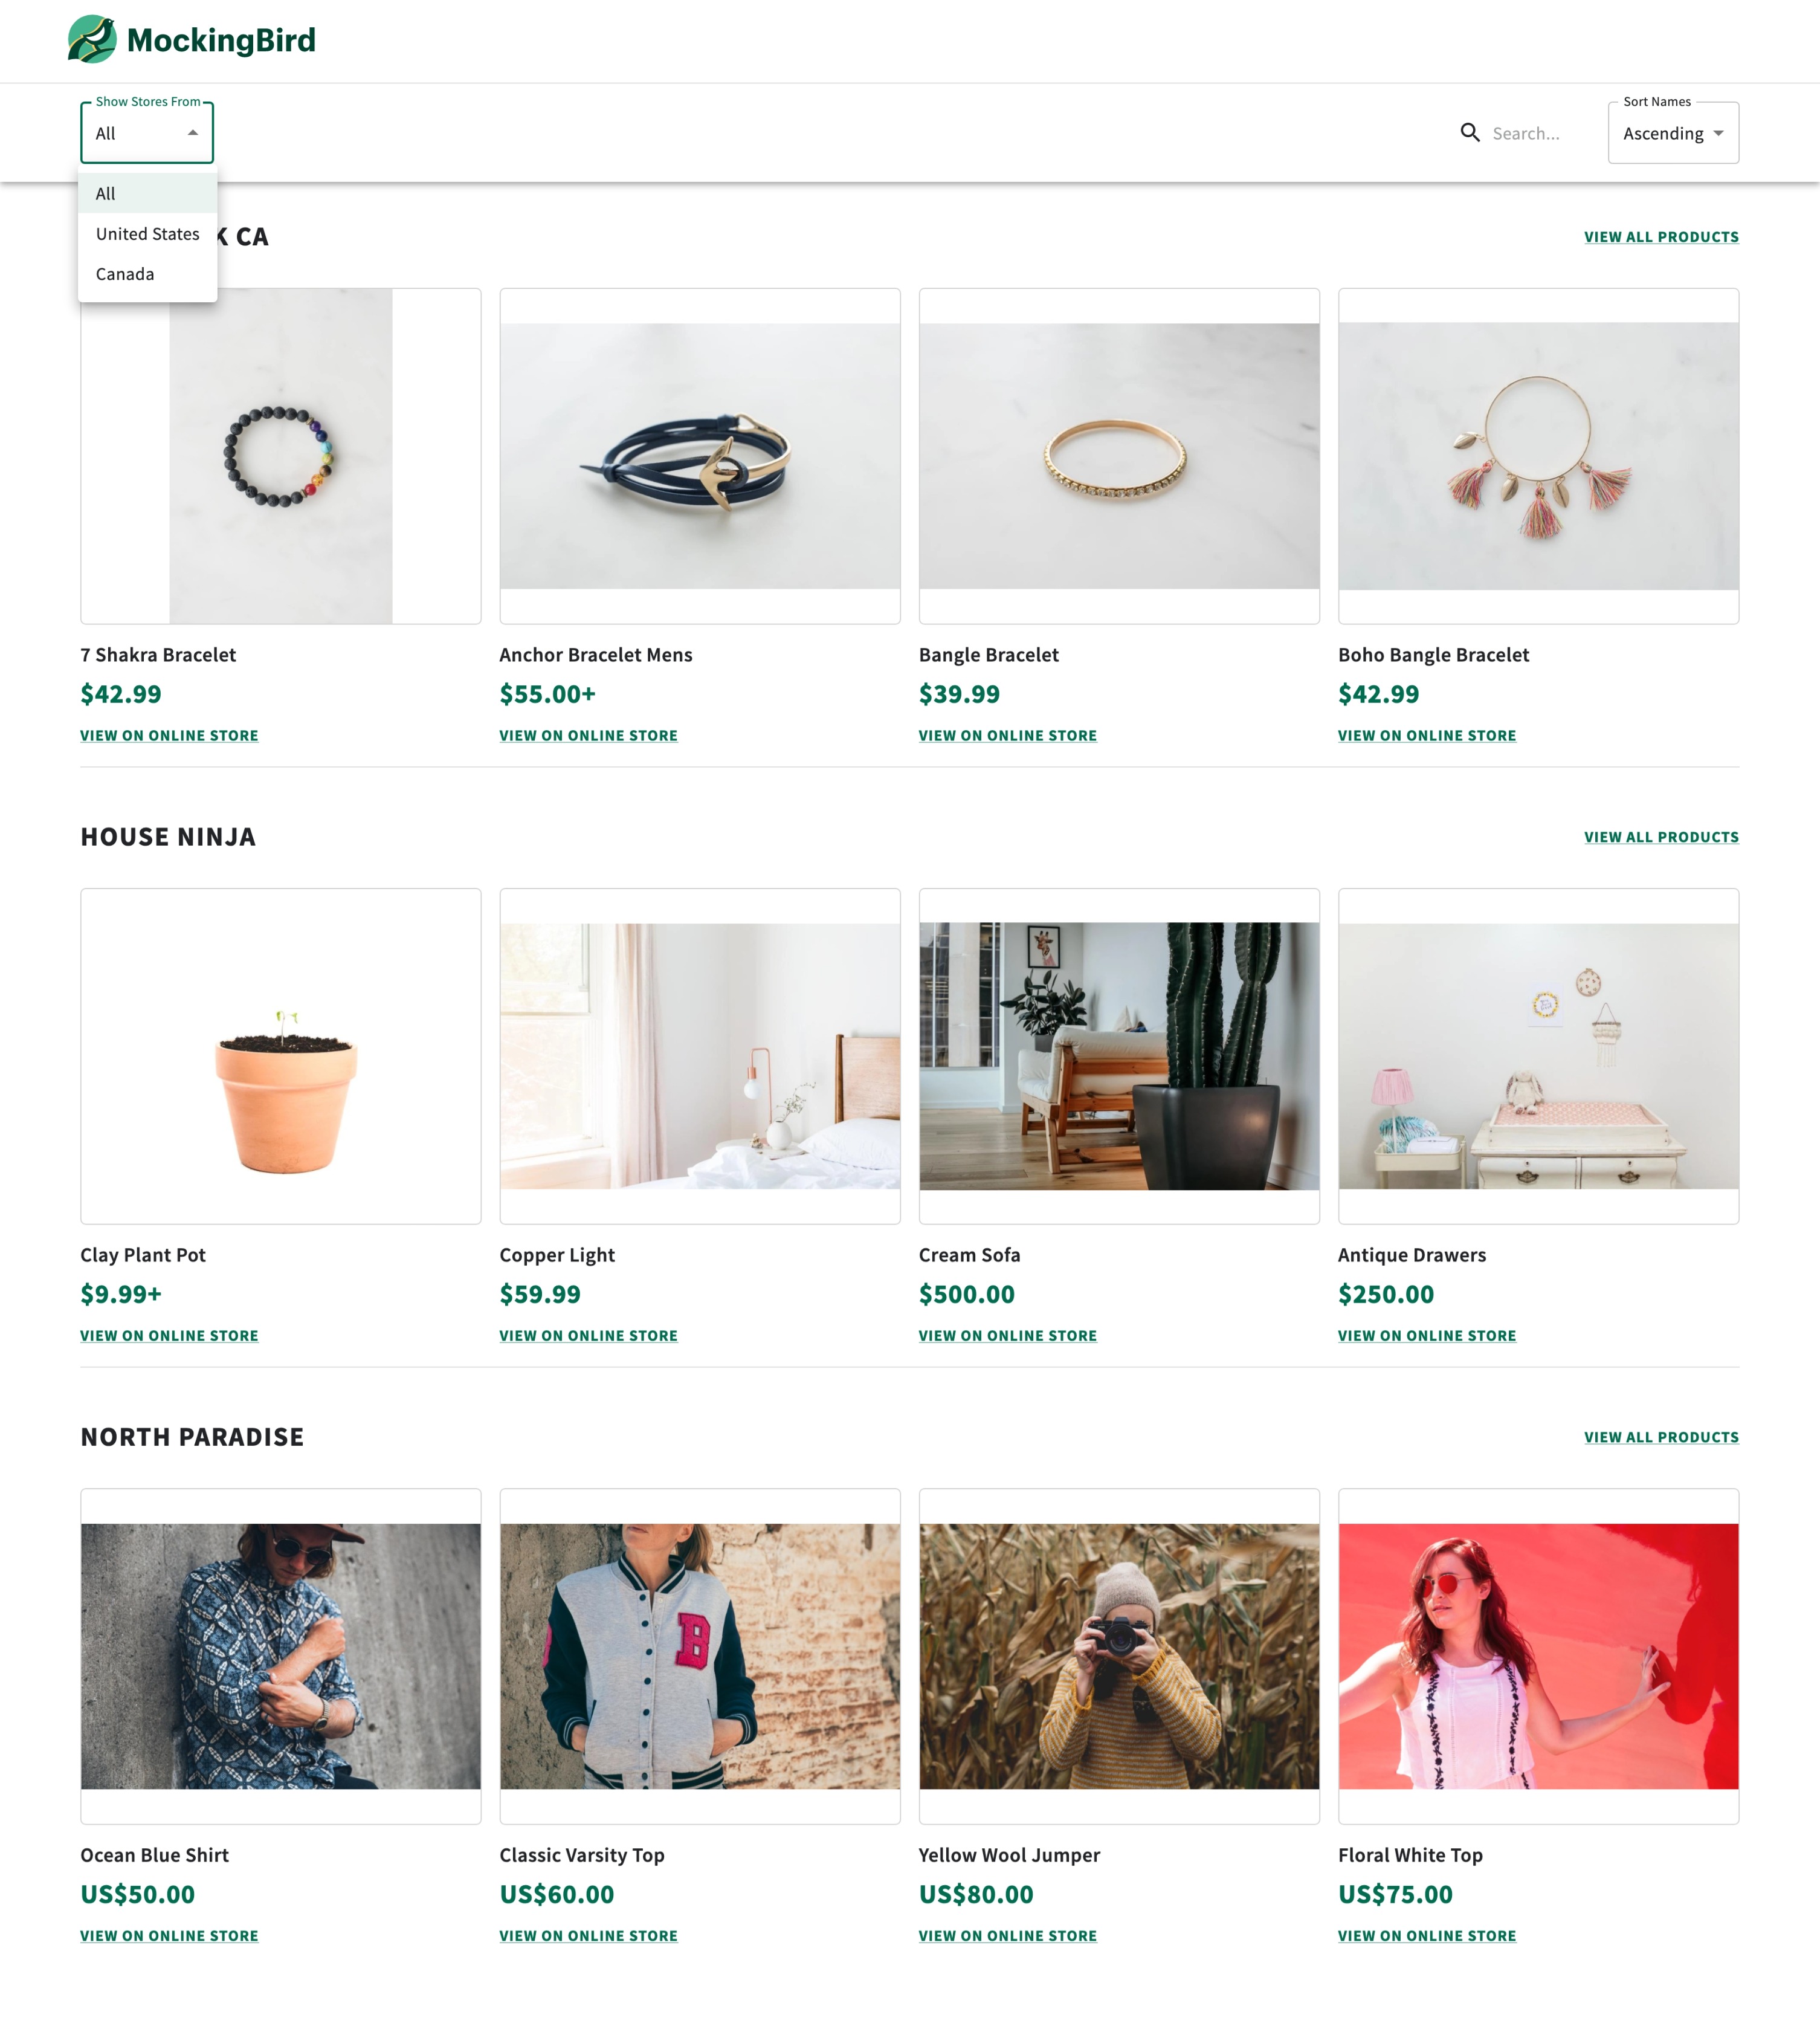 An image of the marketplace homepage with a country filter dropdown list